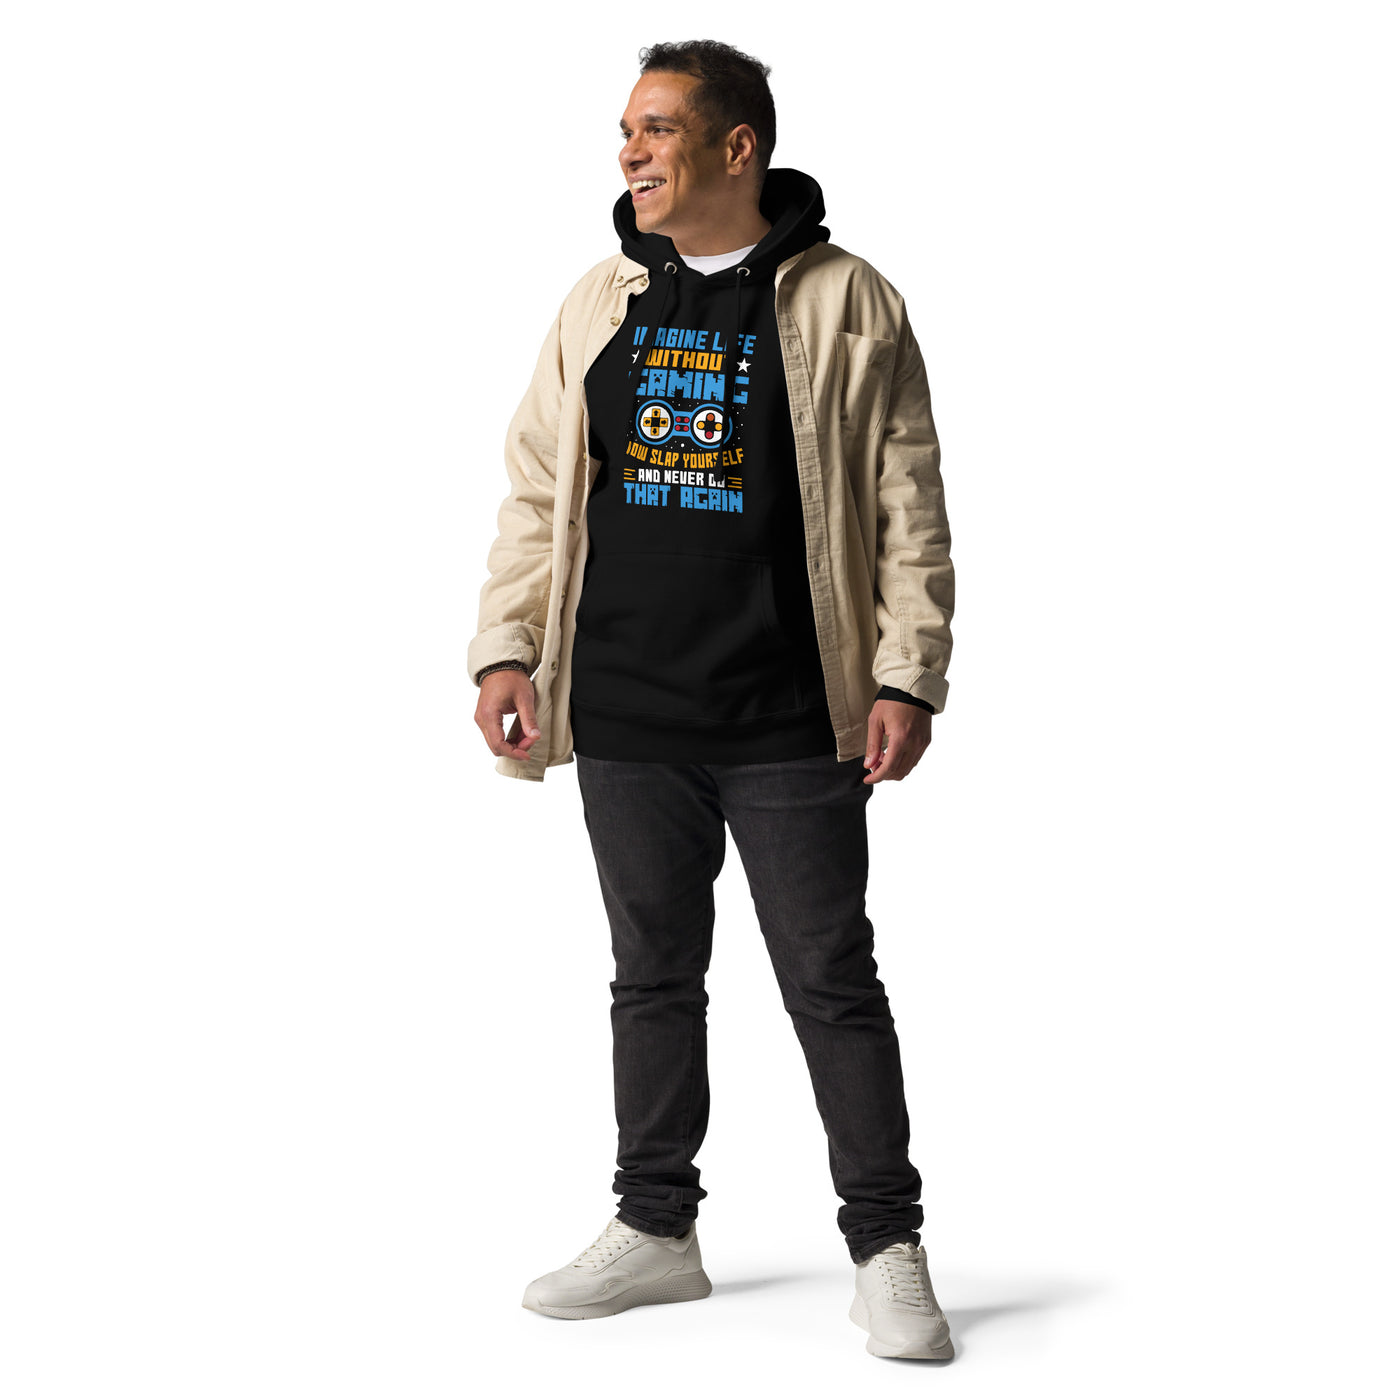 Imagine Life Without Gaming Now Slap Yourself and Never Do that again Rima 15 - Unisex Hoodie